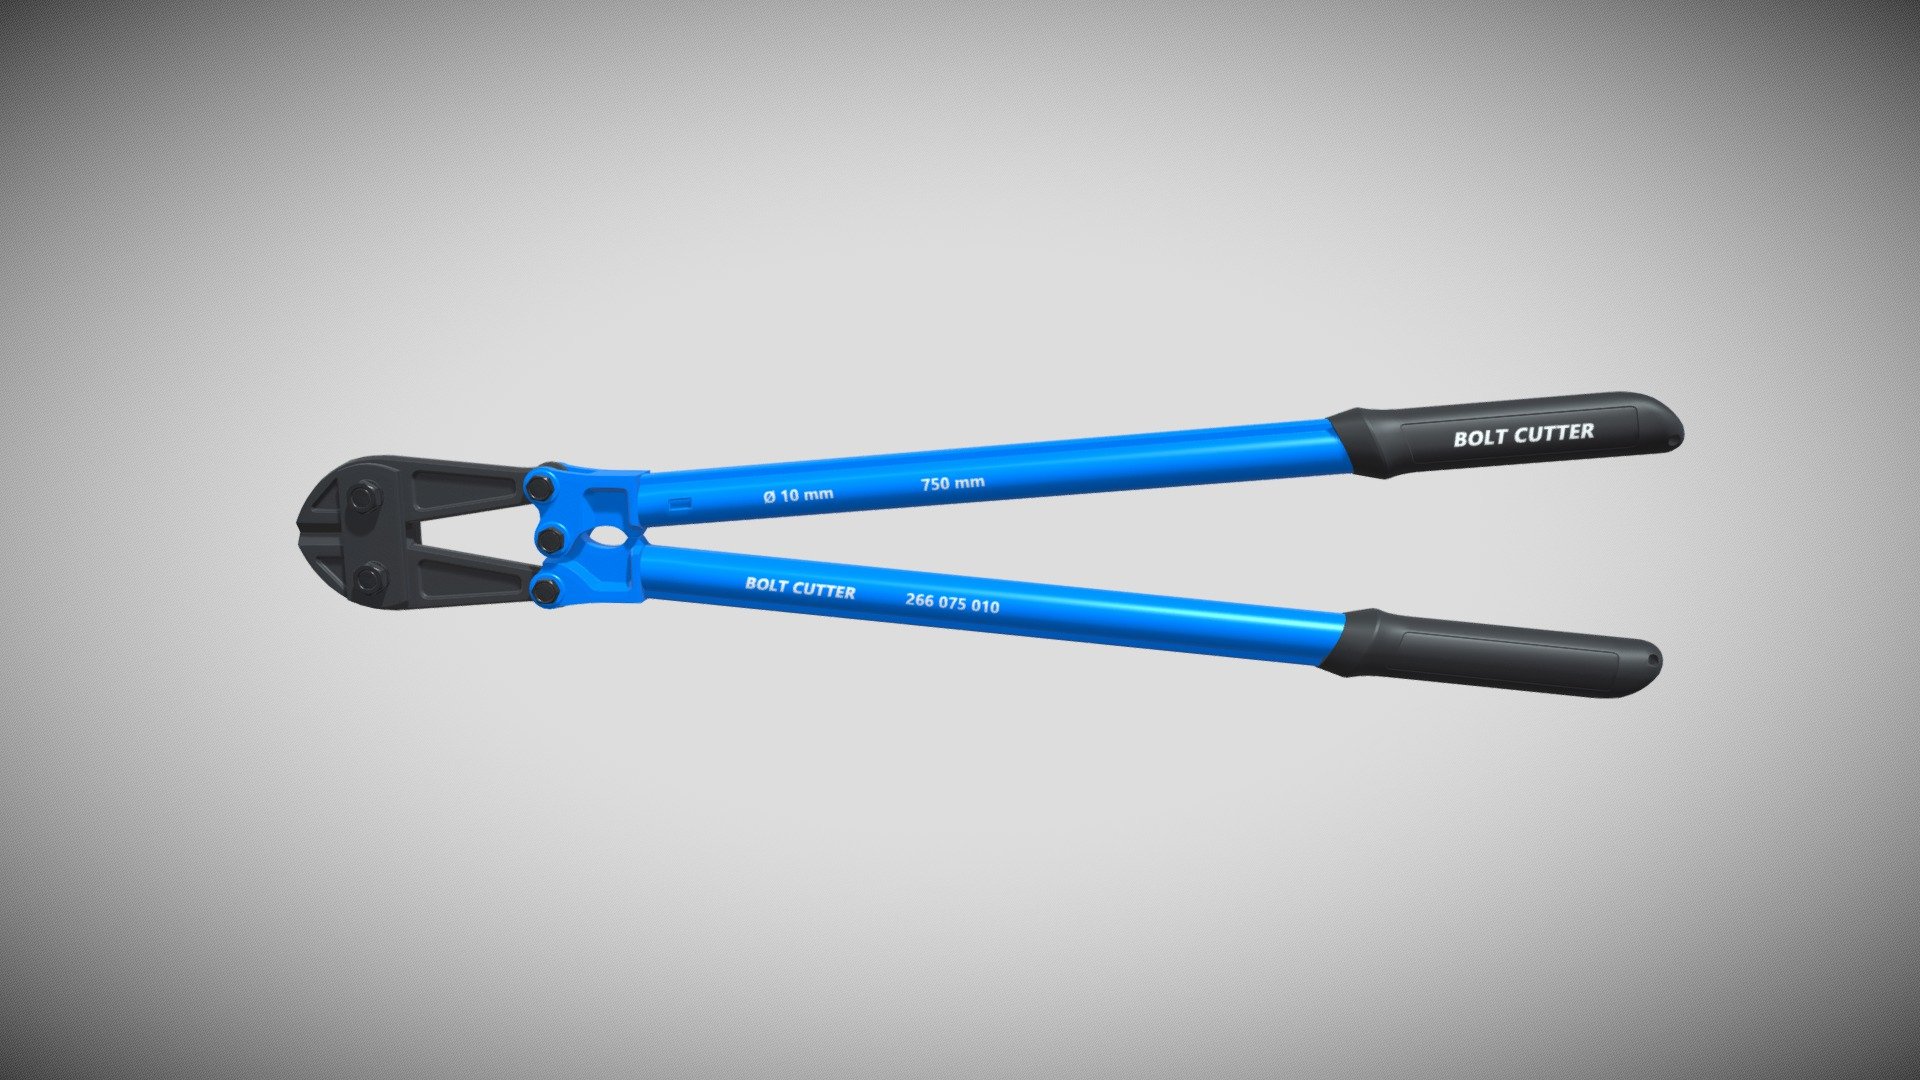 Detailed model of a Bolt Cutter, modeled in Cinema 4D.The model was created using approximate real world dimensions.

The model has 19,356 polys and 18,934 vertices.

An additional file has been provided containing the original Cinema 4D project files with both standard and v-ray materials, textures and other 3d export files such as 3ds, fbx and obj 3d model